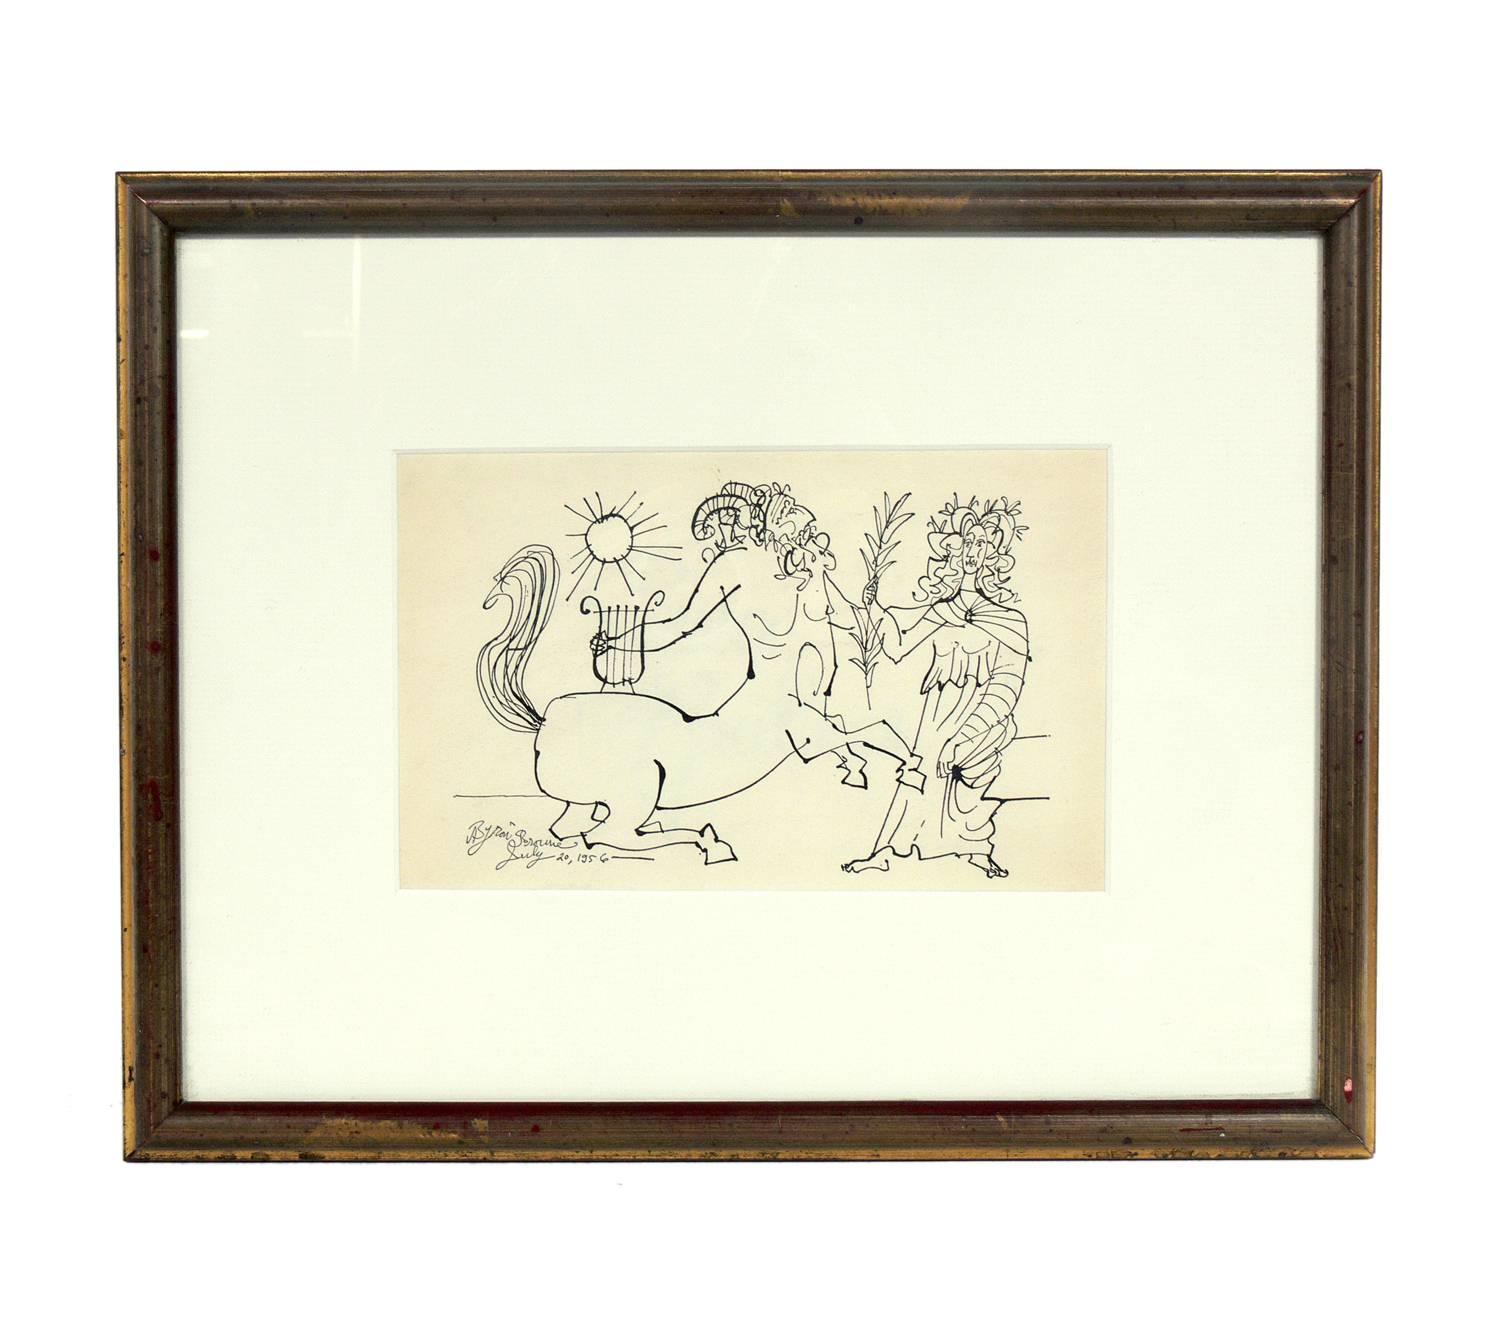 Selection of Modern Art or Gallery Wall, circa 1950s. T
They are:
1) Byron Browne signed and dated drawing, pictured on the top. It has been SOLD.
2) Drawing of Figural Nudes by Miriam Kubach, circa 1950s. It is pictured on the left, and measures